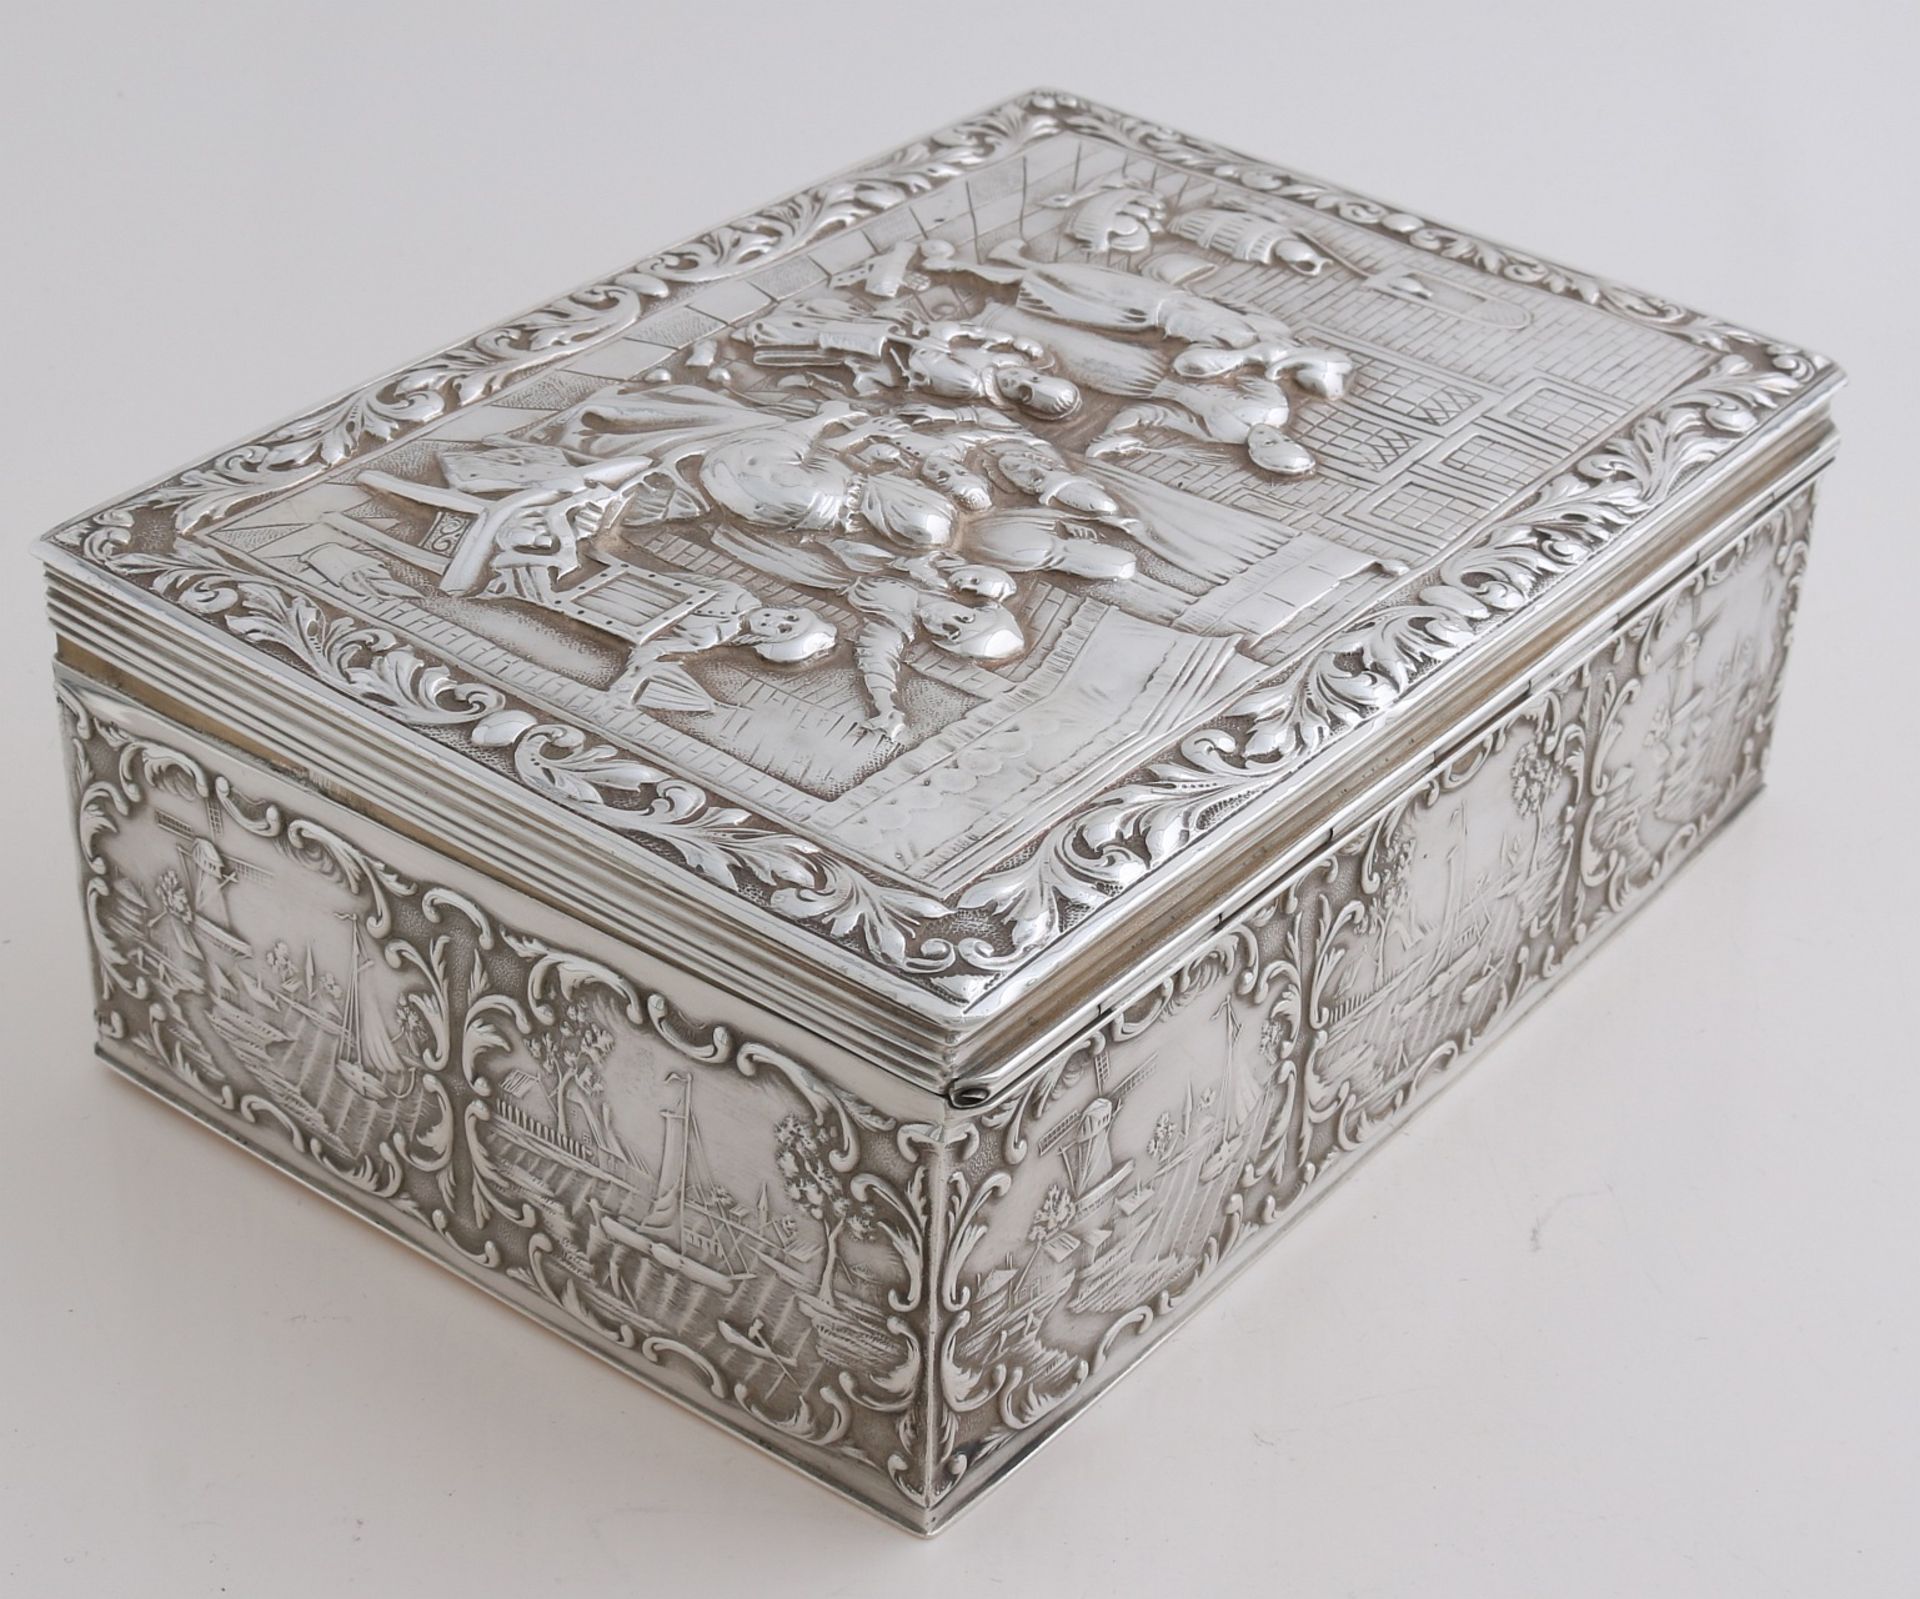 Silver biscuit tin - Image 2 of 3